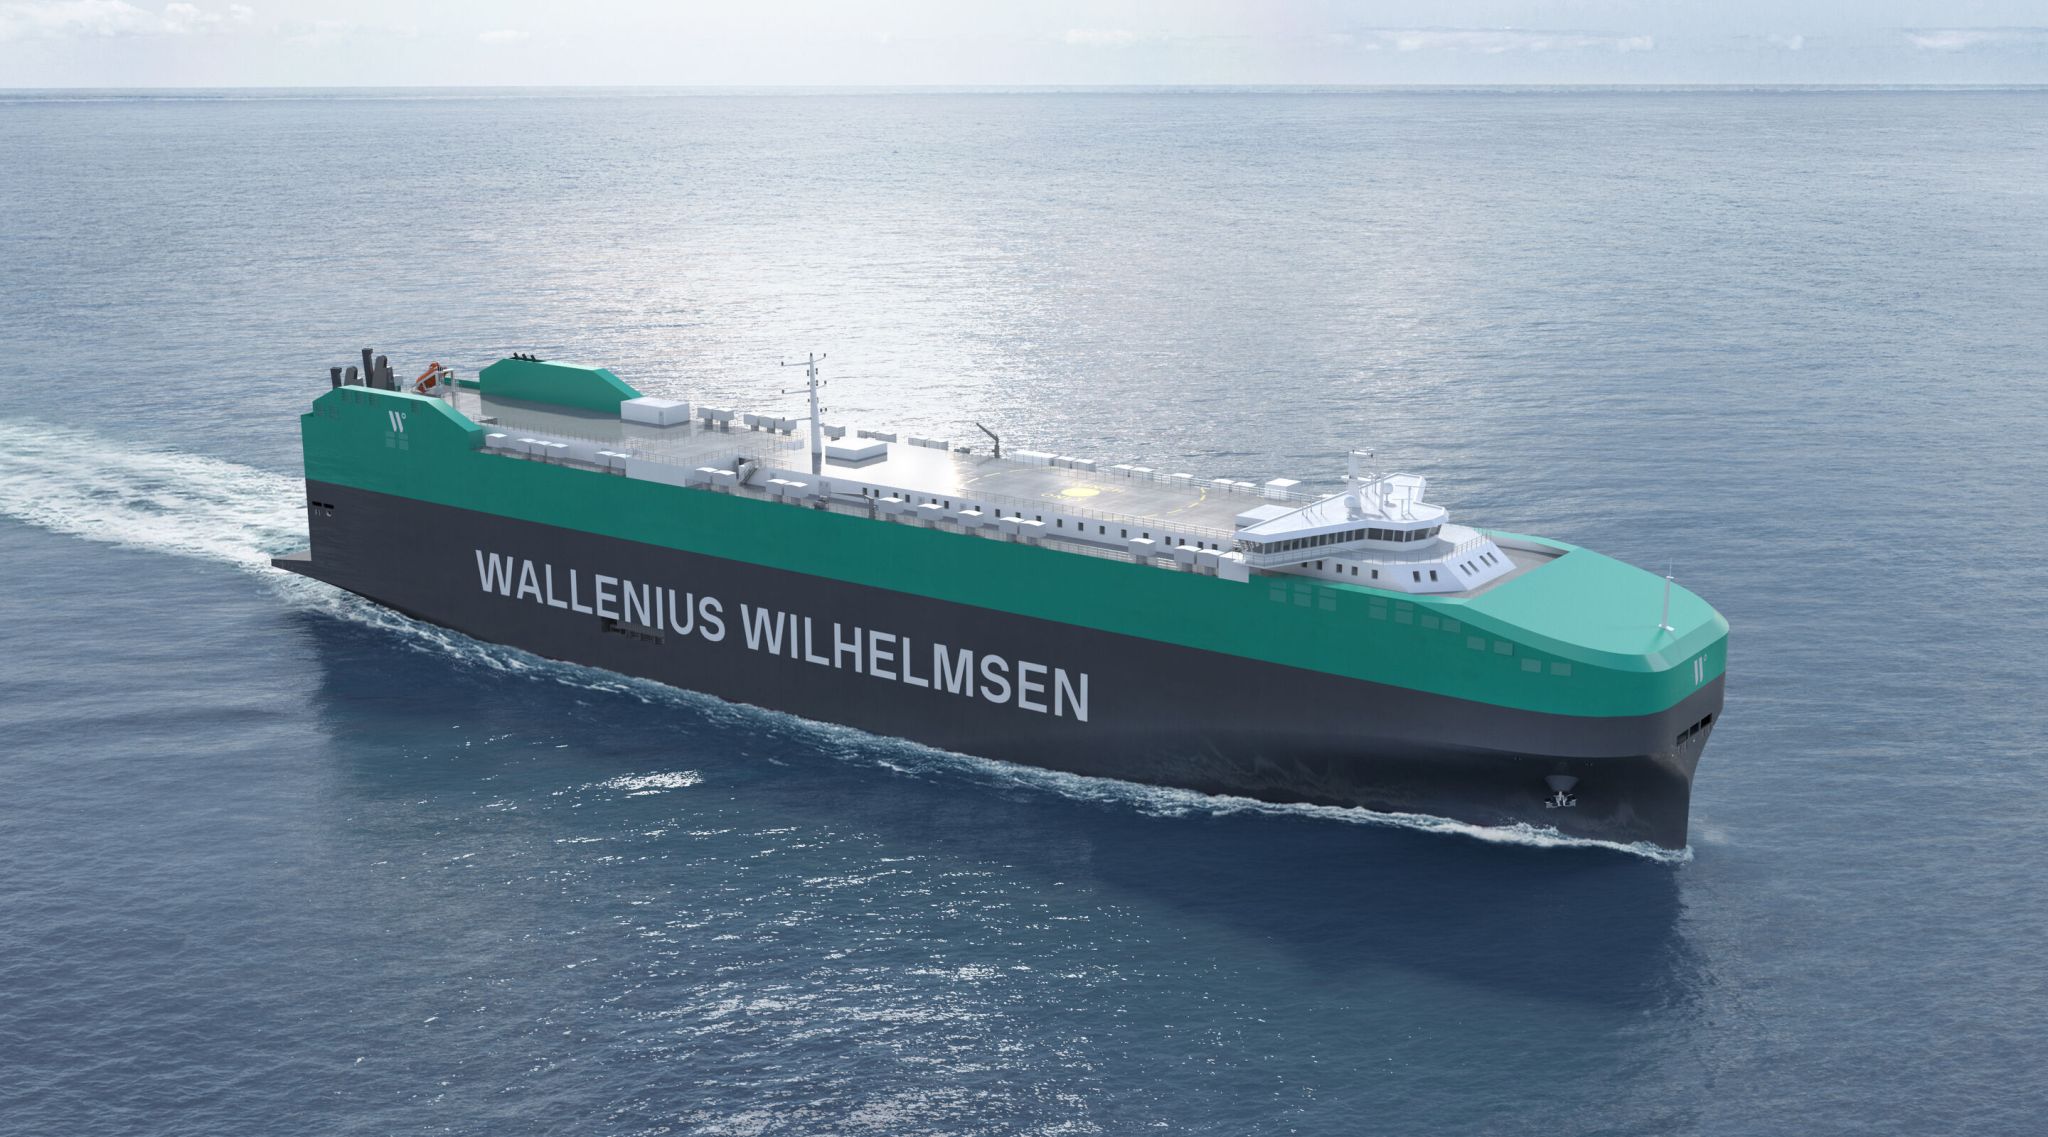 Wallenius Wilhelmsen firms up order for methanol-capable and ammonia-ready newbuilds